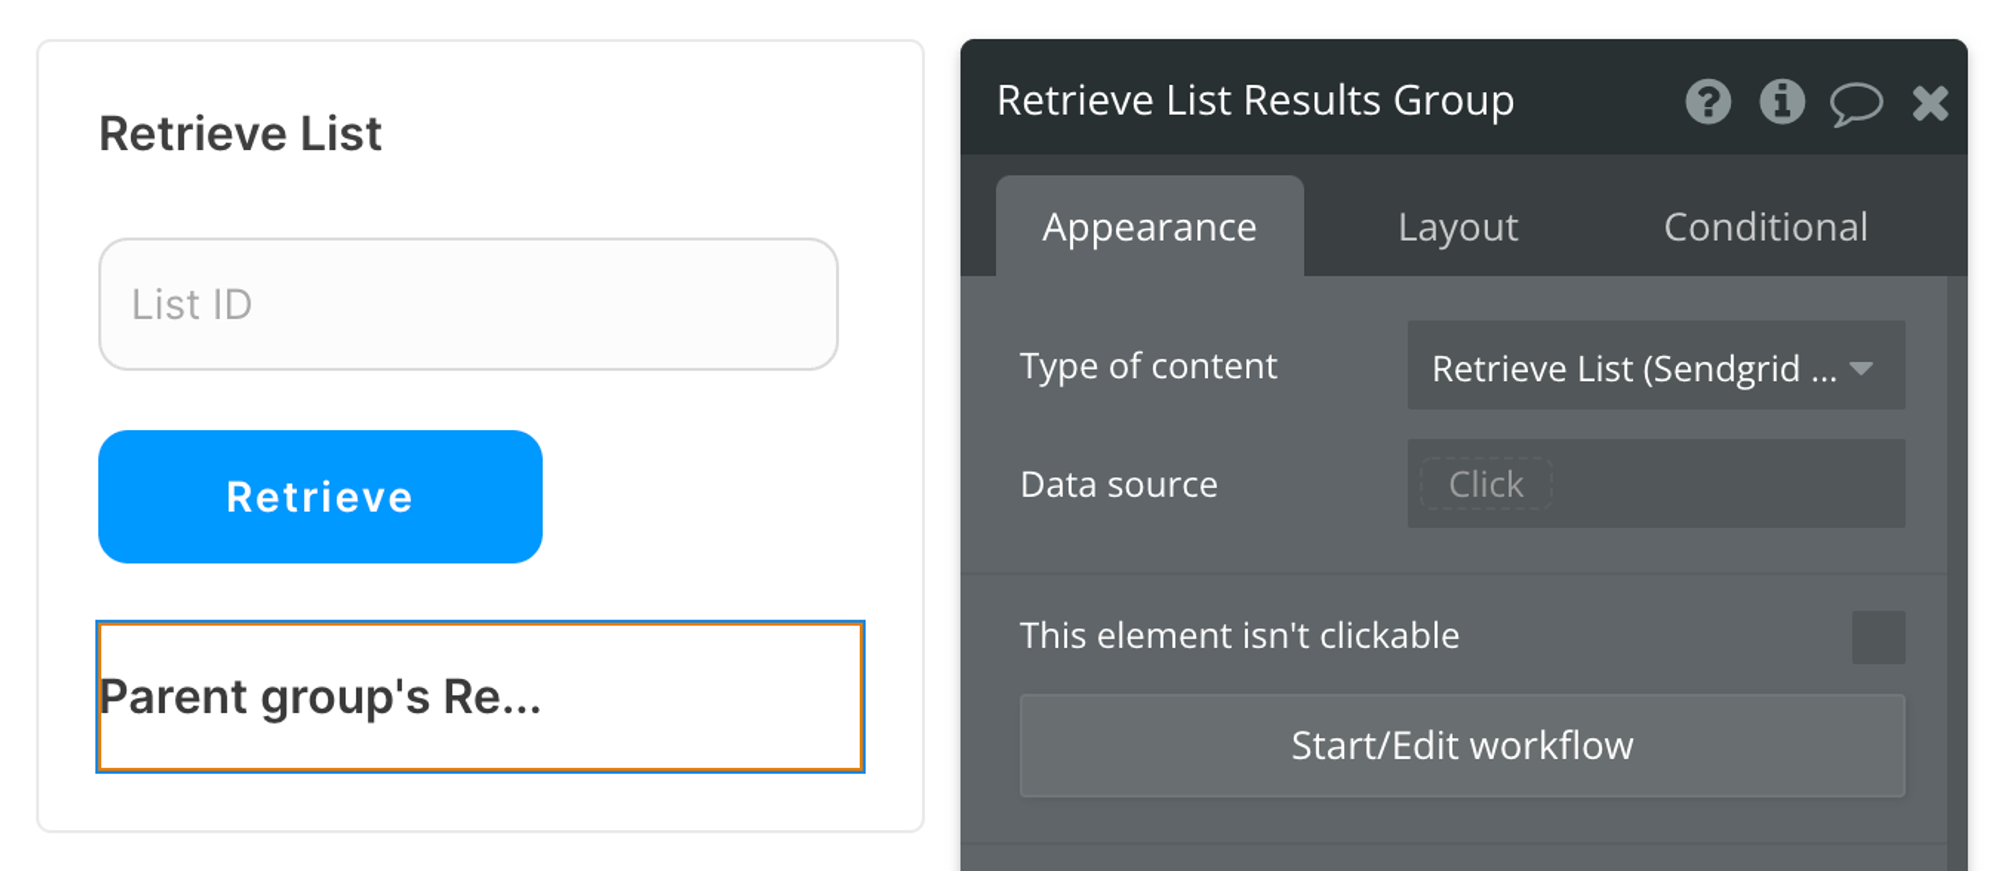 Select Retrieve List (Sendgrid Campaigns) from the list of content types